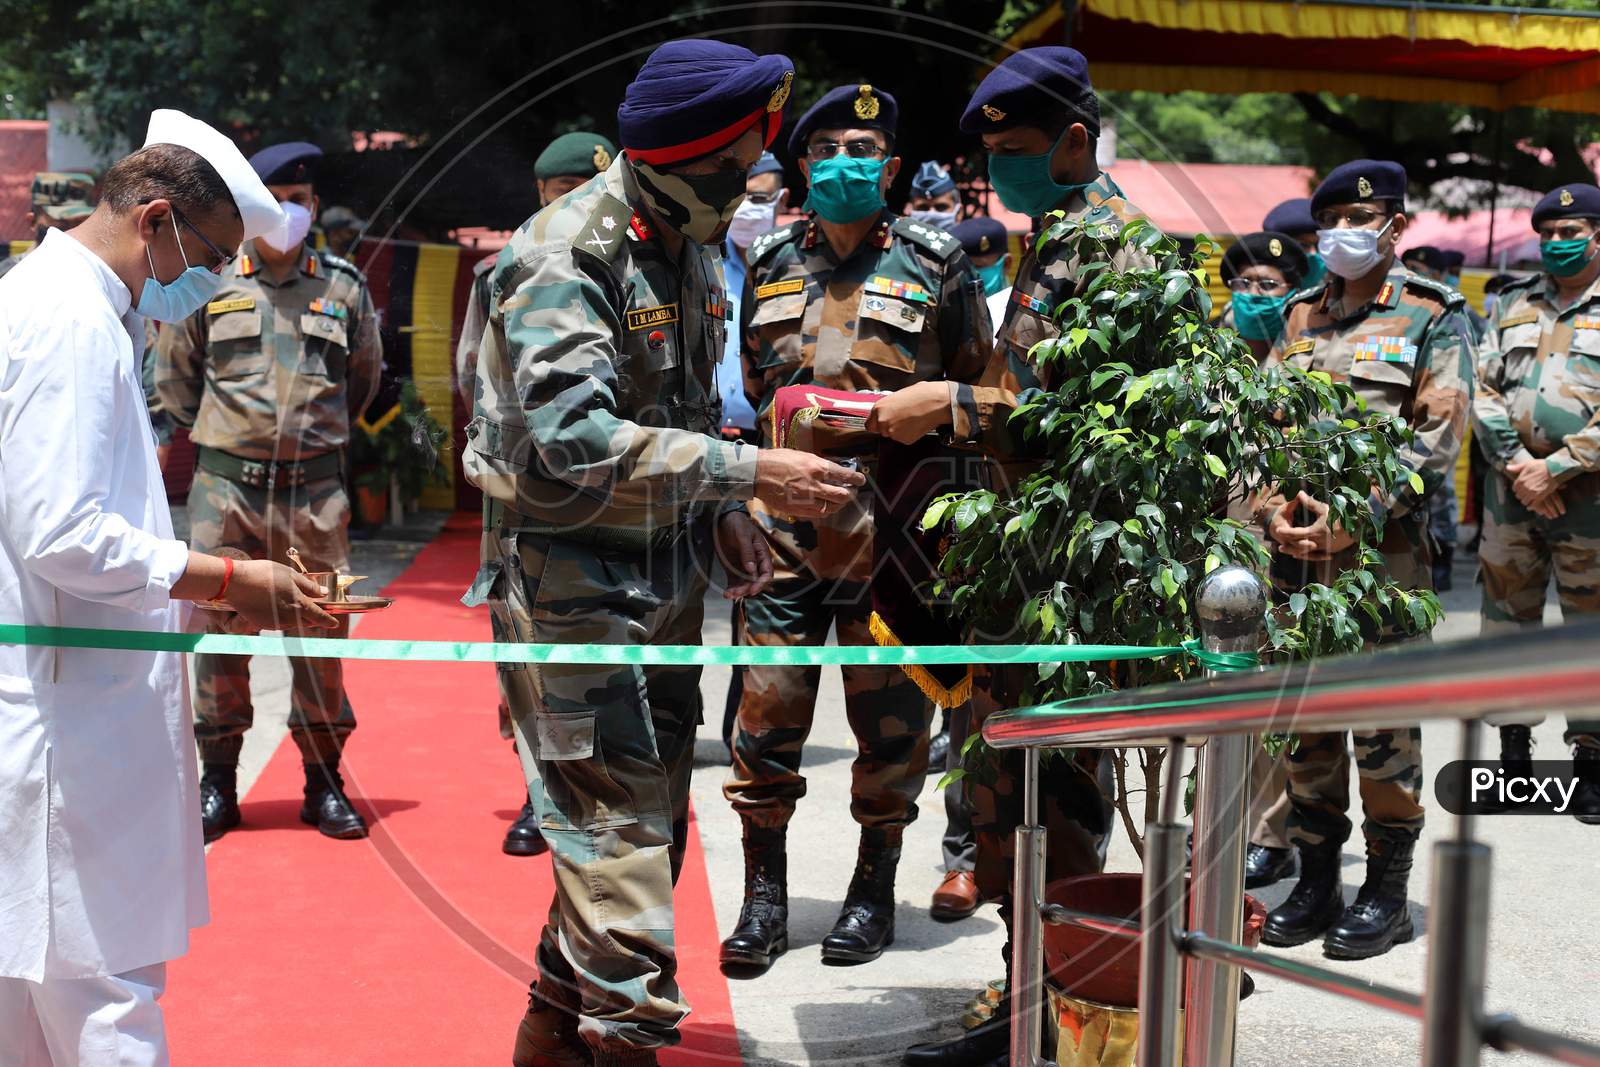 Major Gen IM Lamba, General Officer Commanding, Nothern UP & MP Sub Area, inaugurates COVID High Dependency Unit (HDU) Complex at a Military Hospital in Prayagraj, August 4, 2020